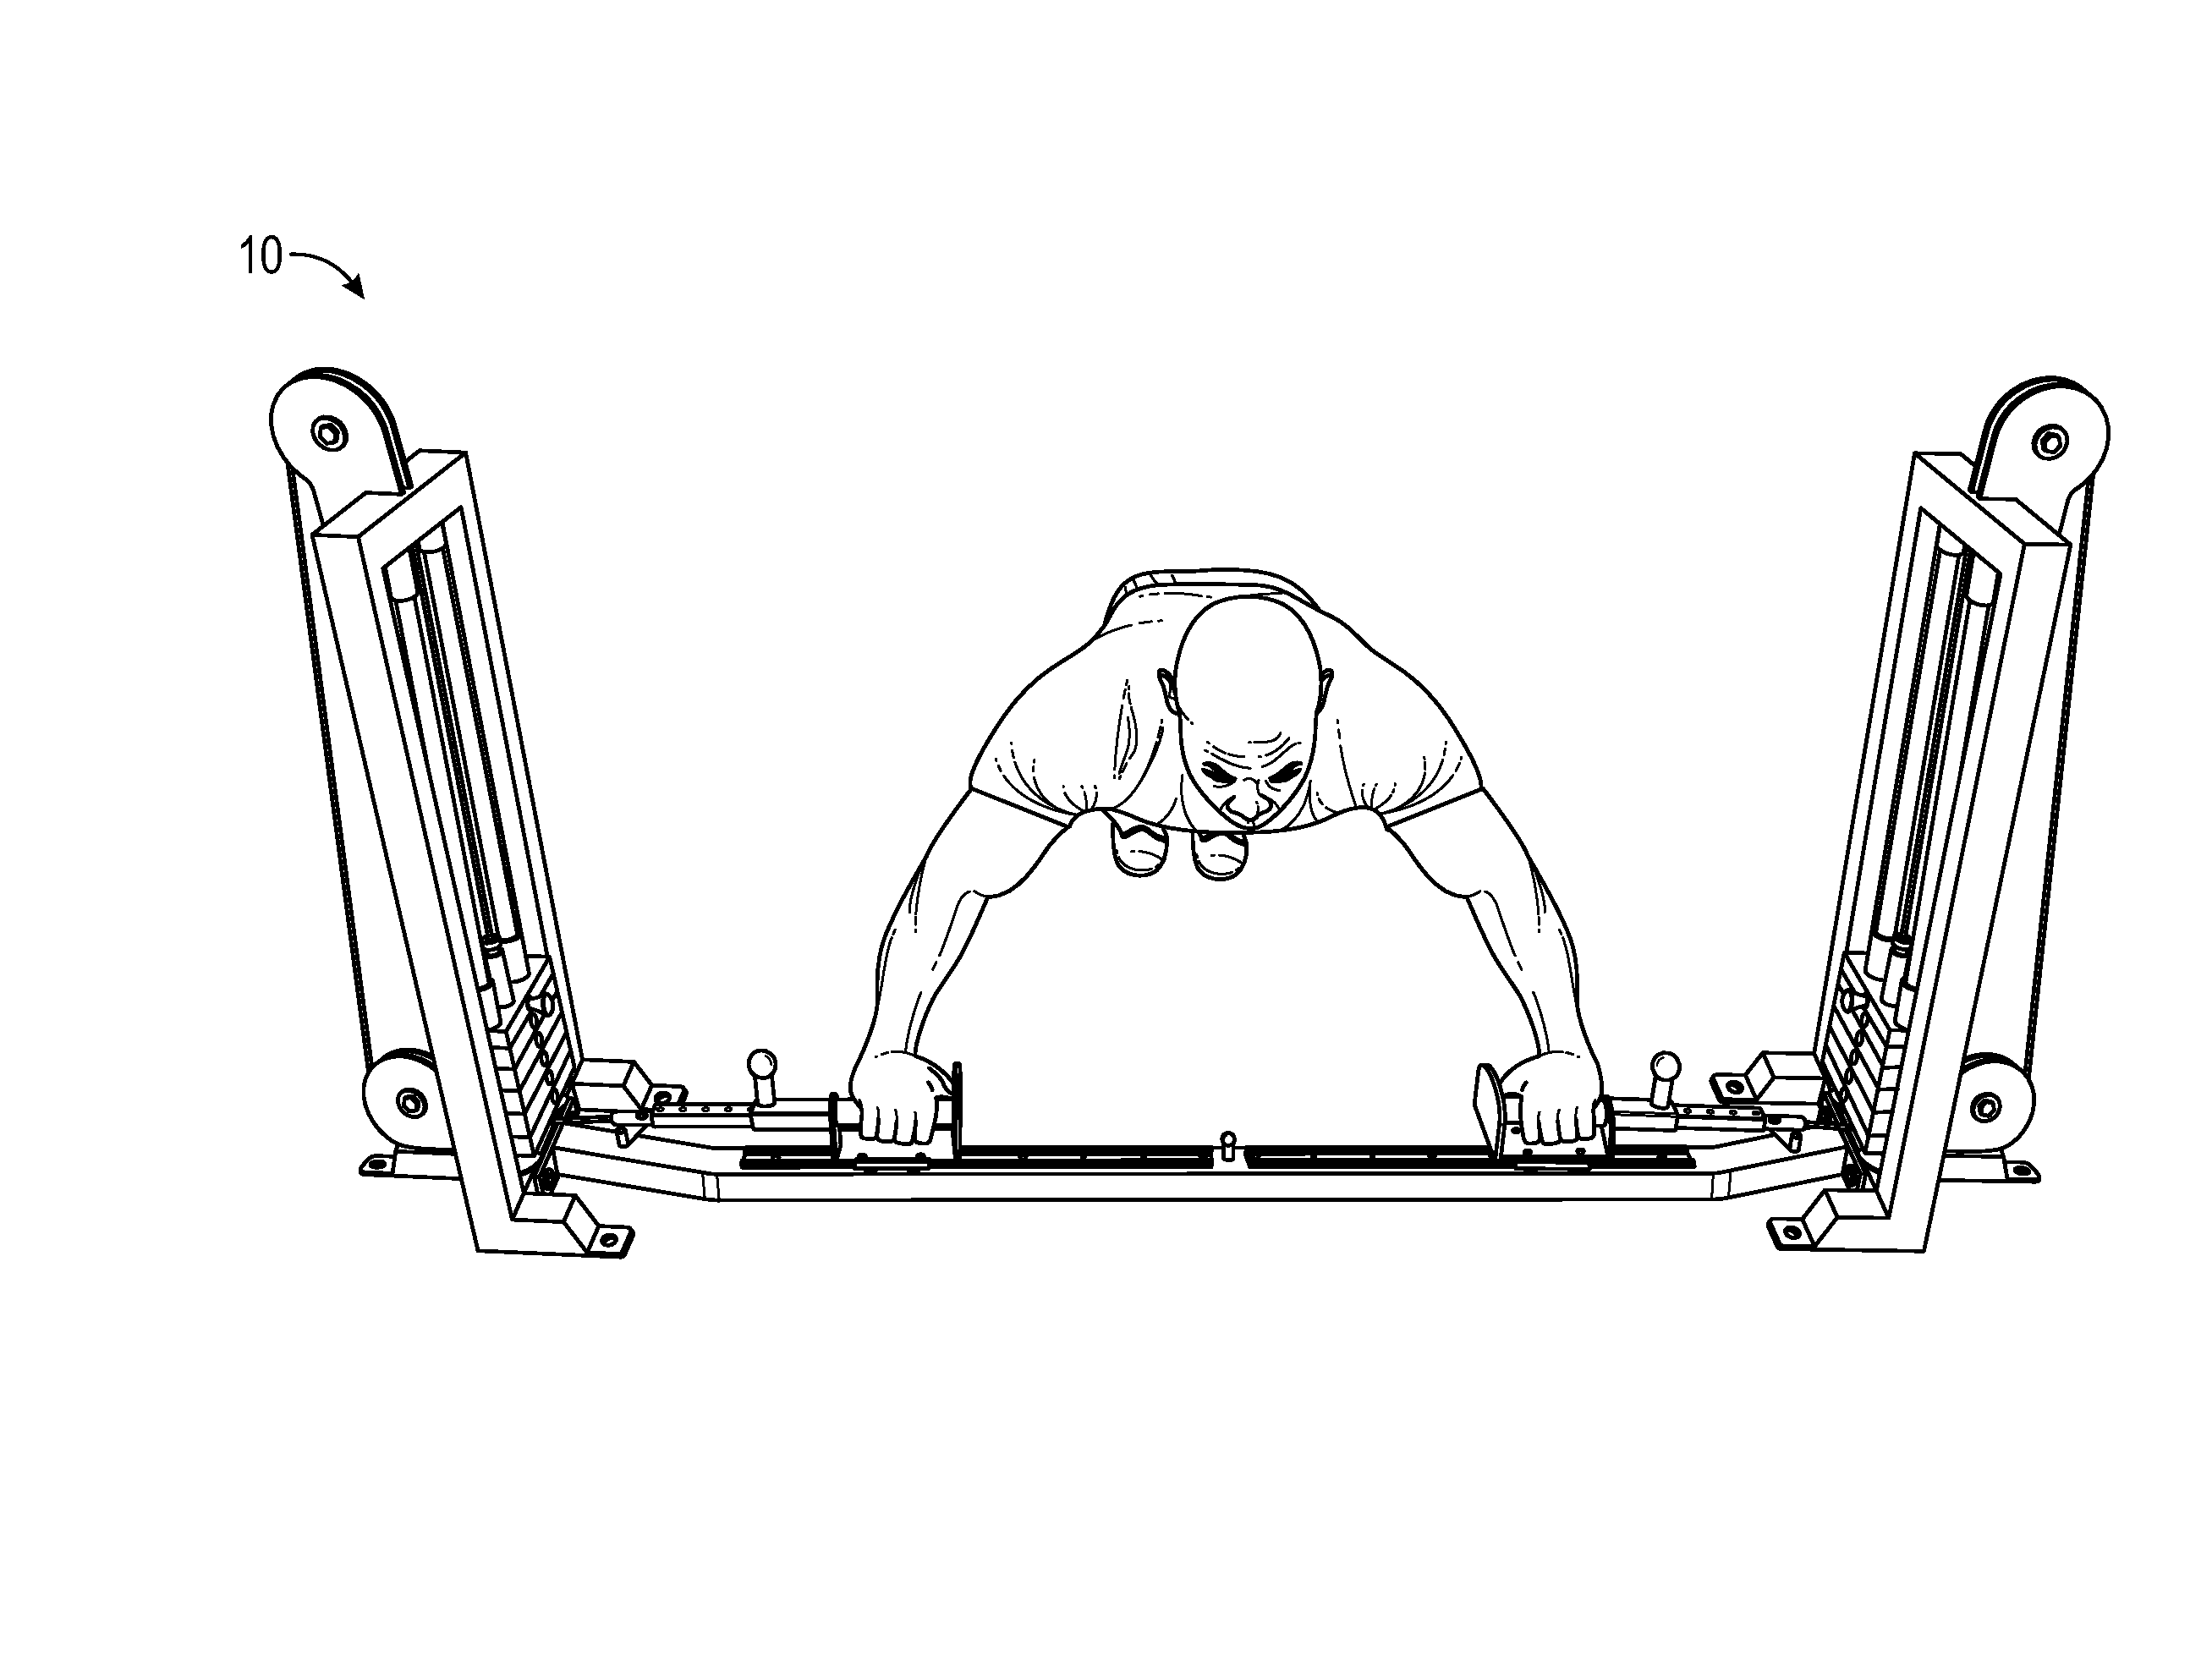 Weight stack pushup exercise device